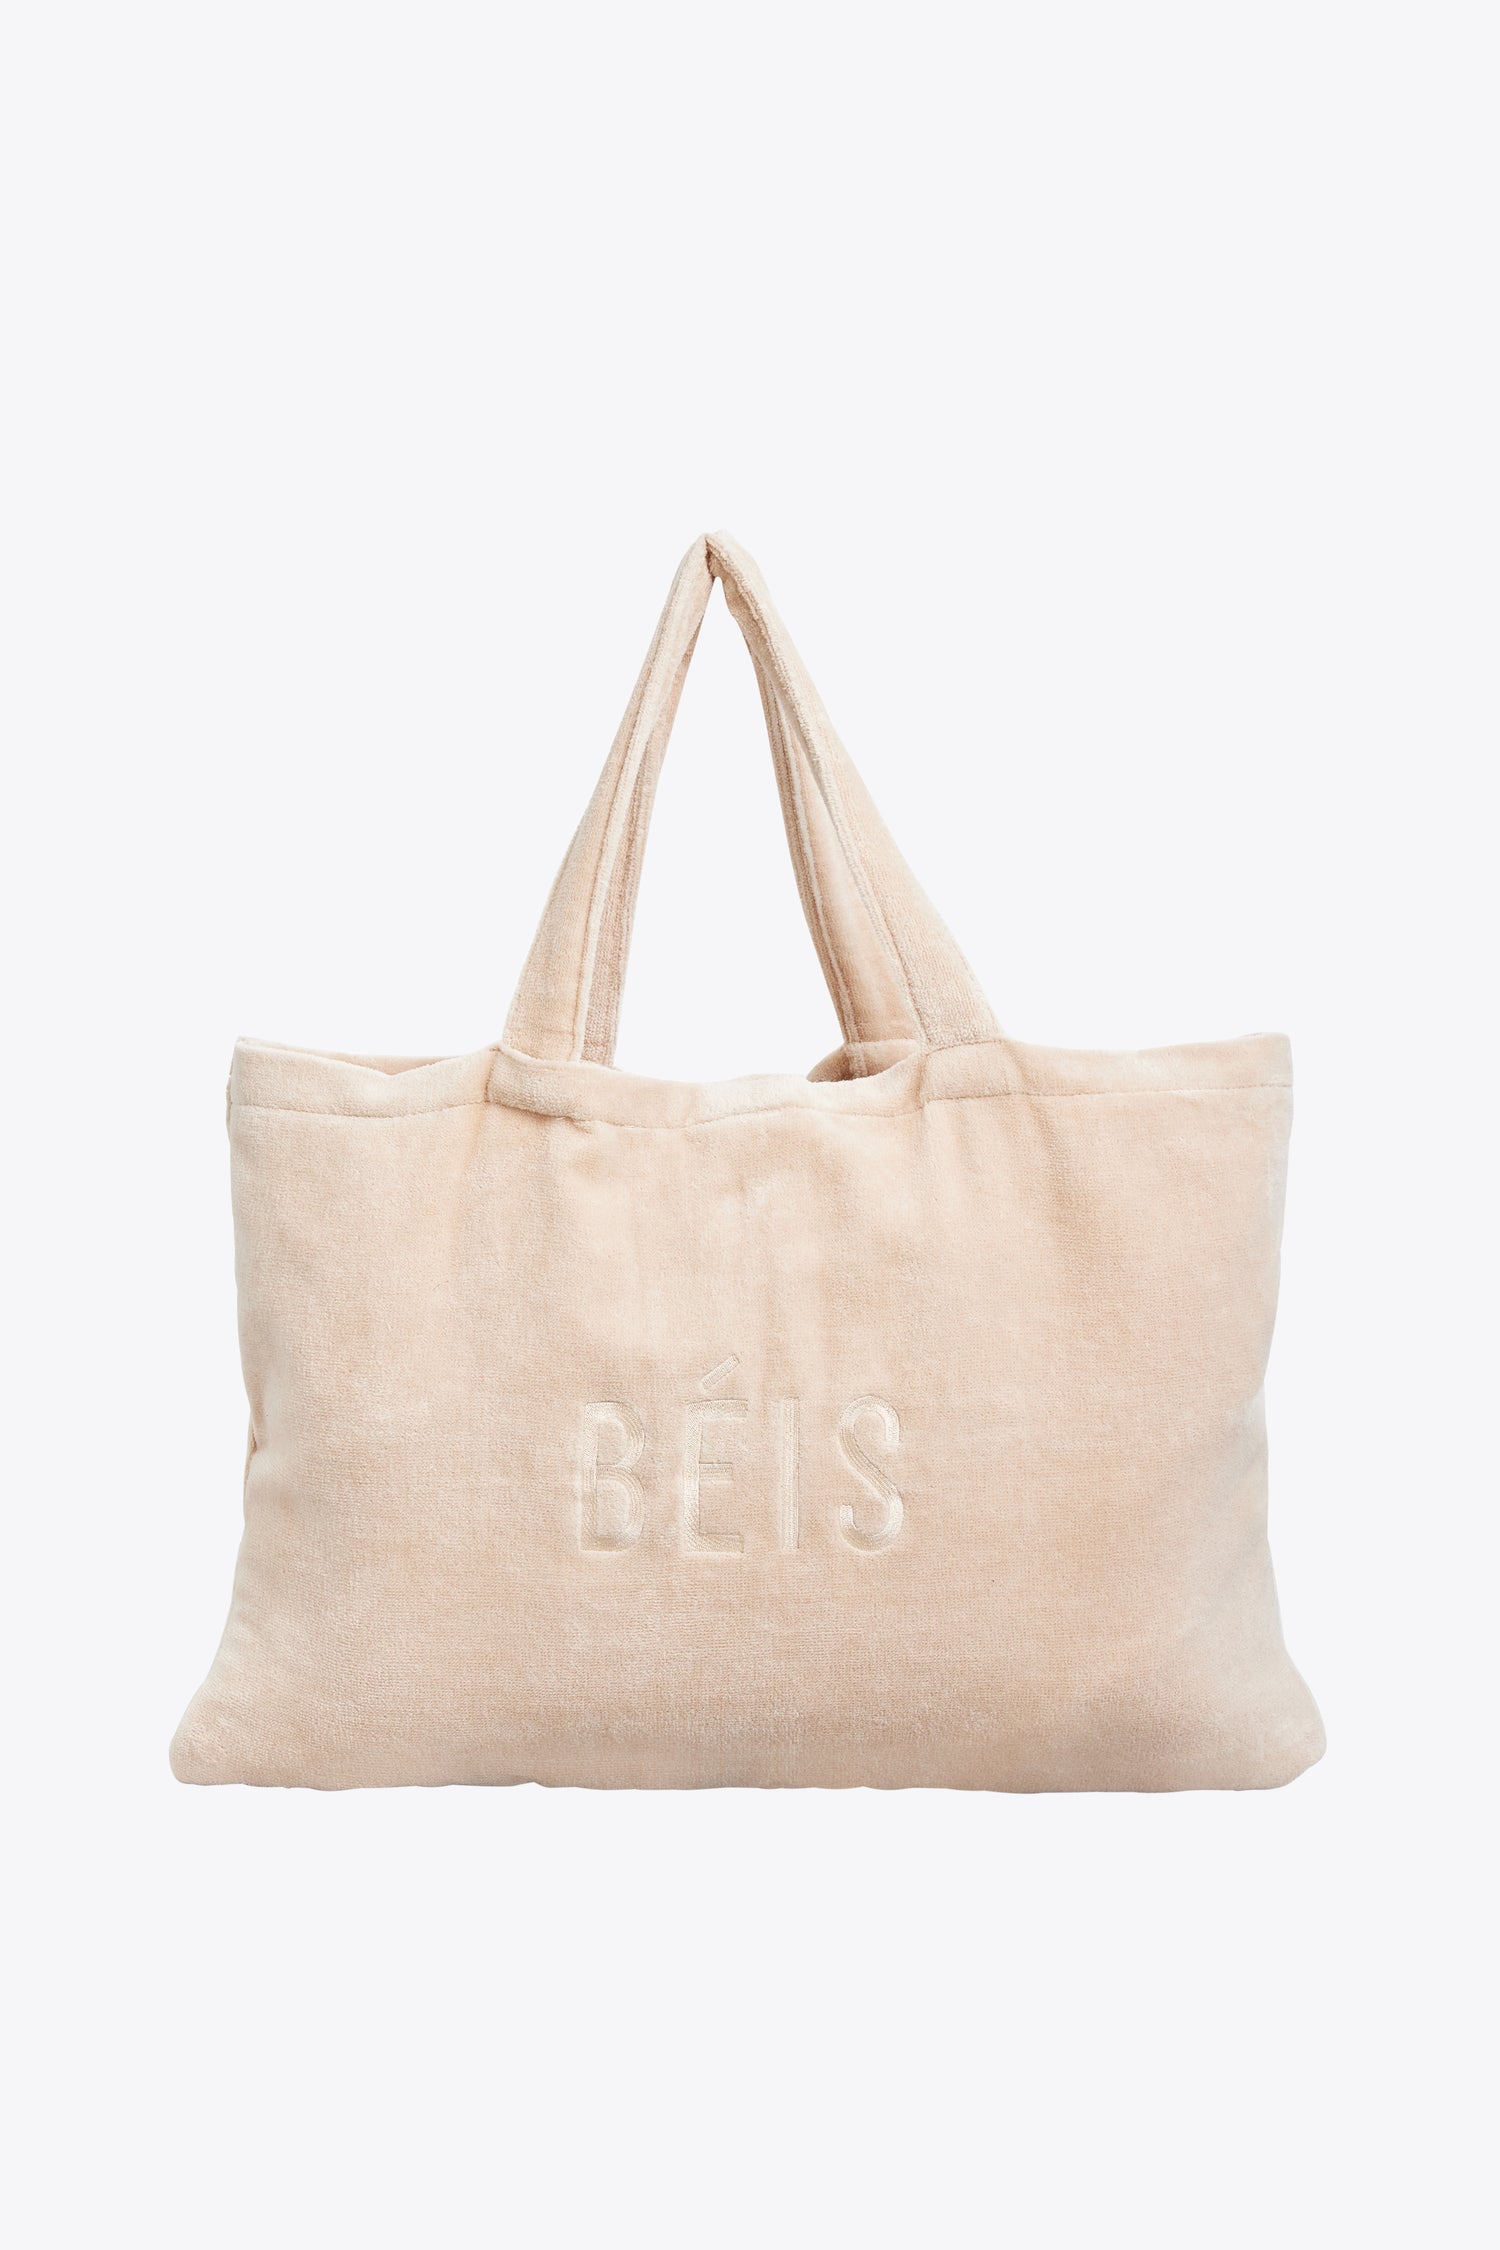 The Terry Towel Tote